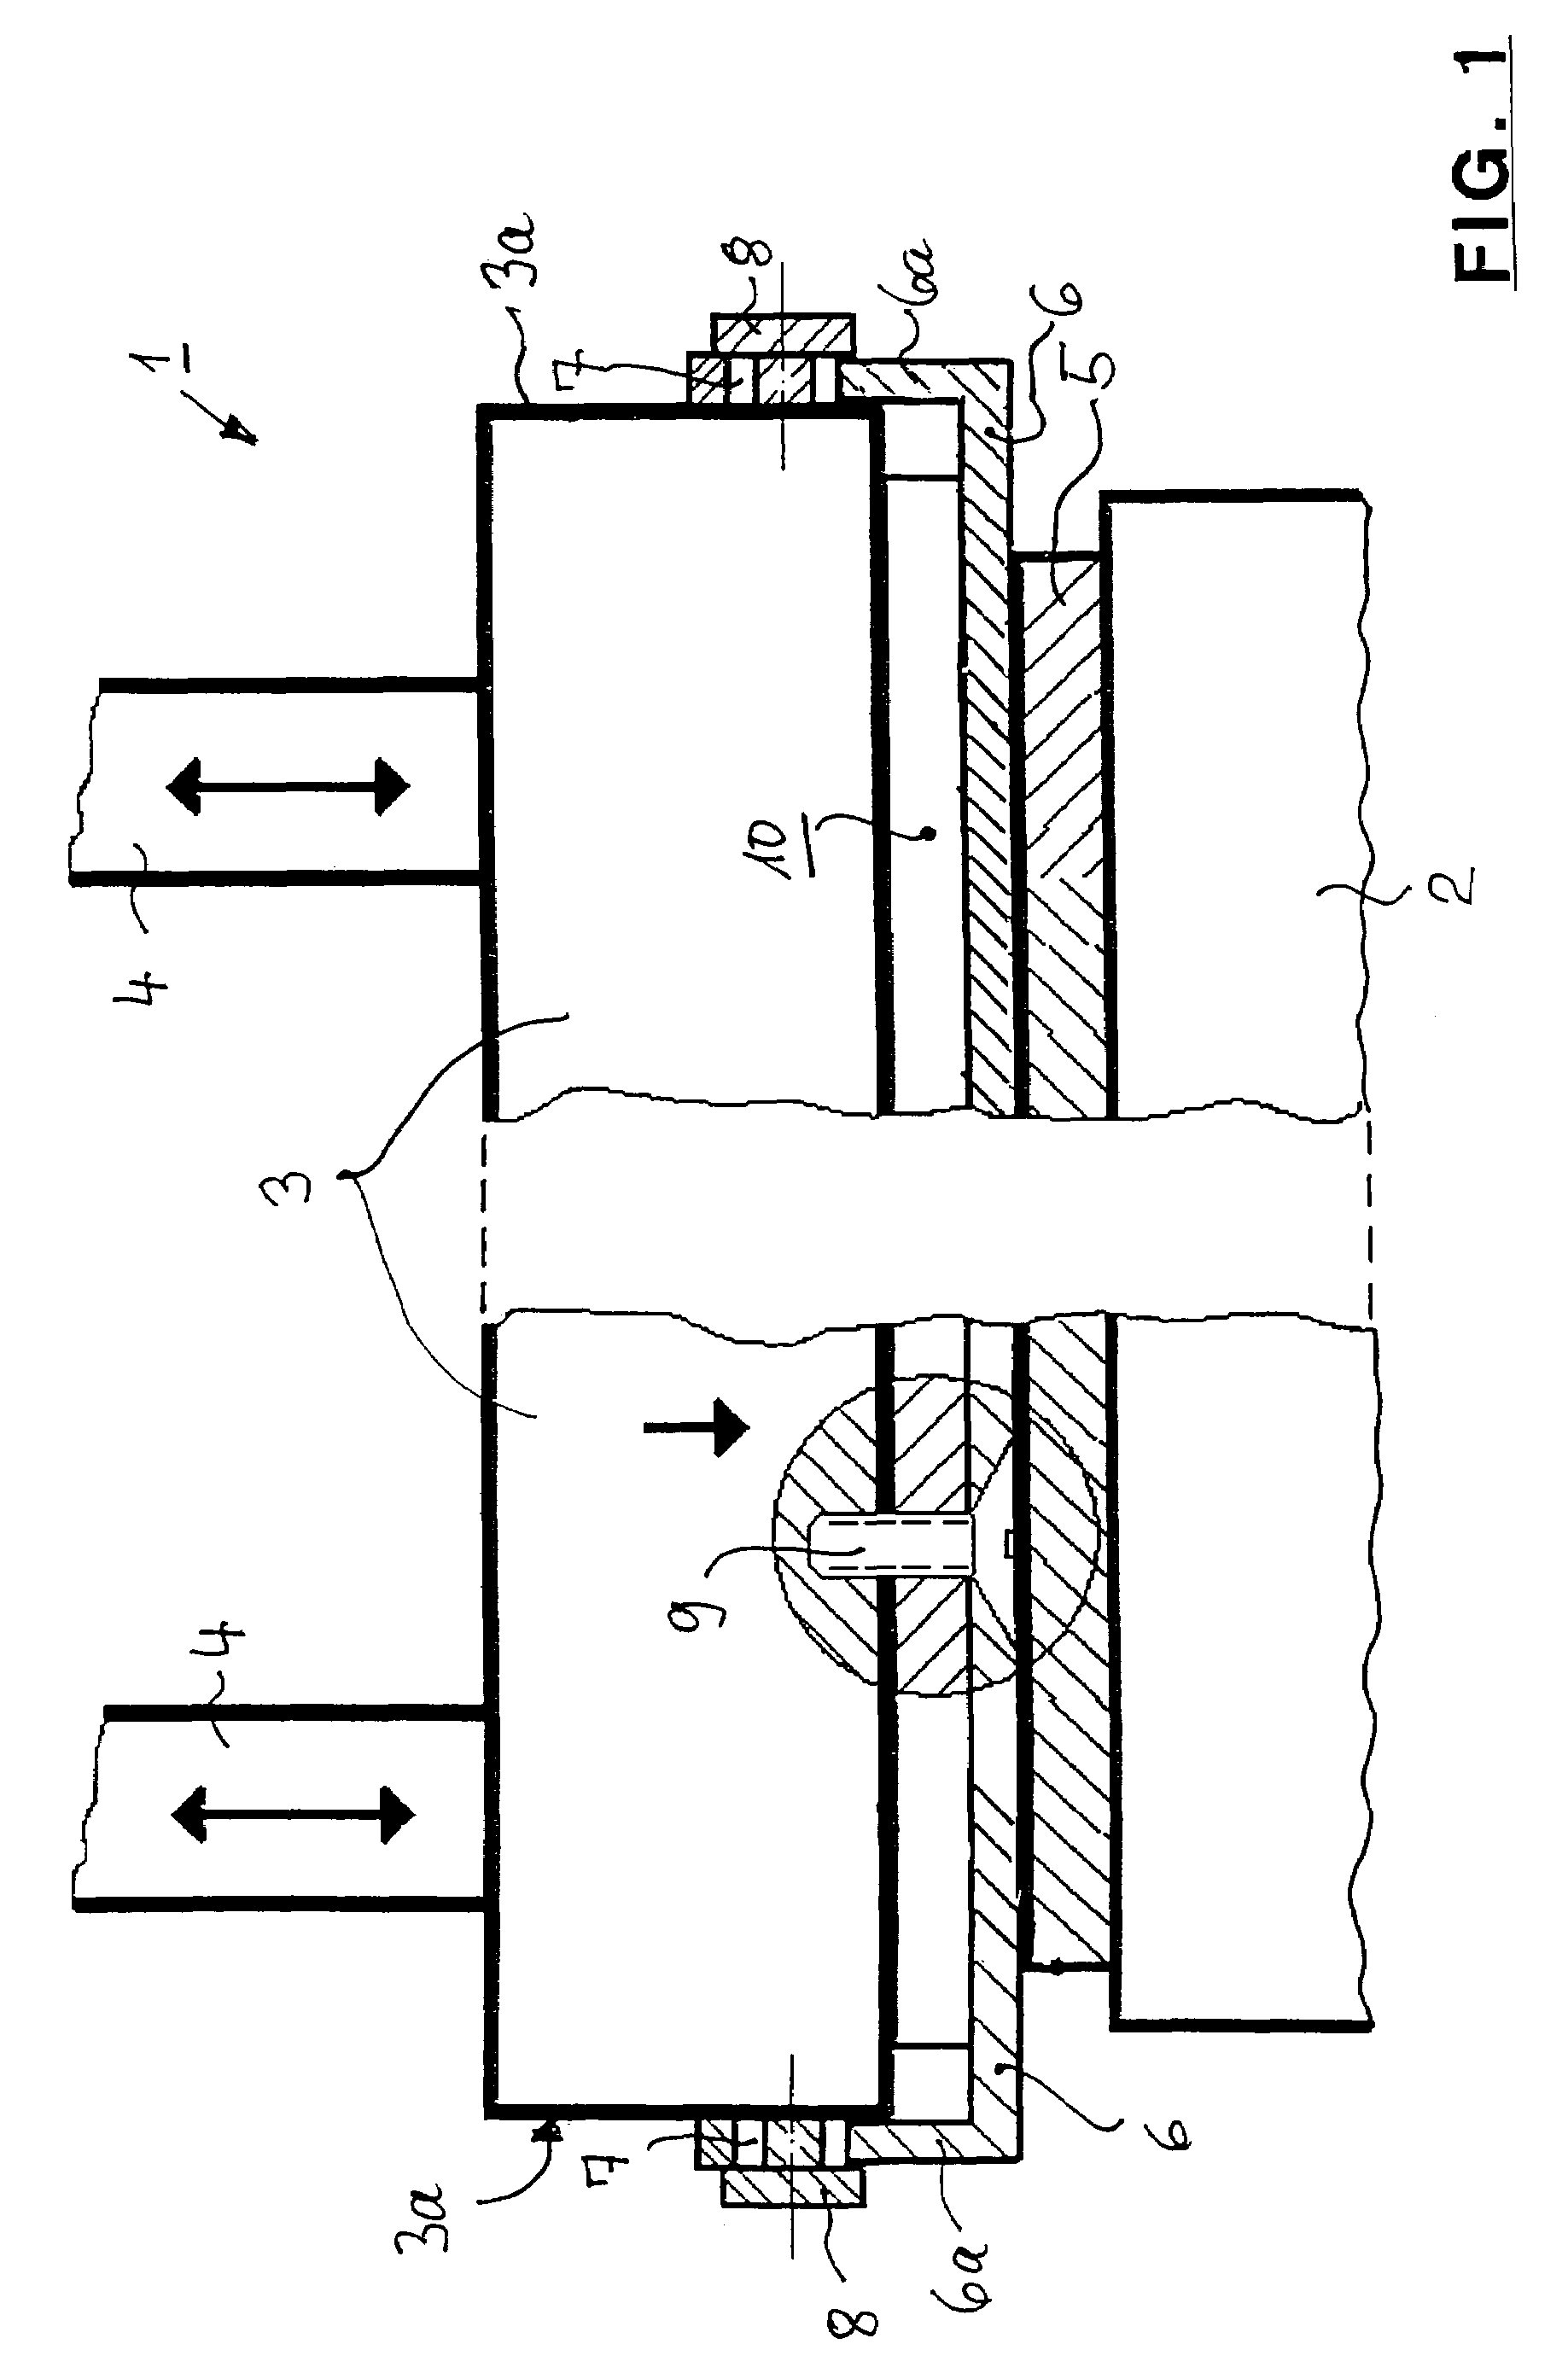 Hot pressing apparatus with a pressure plate and at least one resilient lining